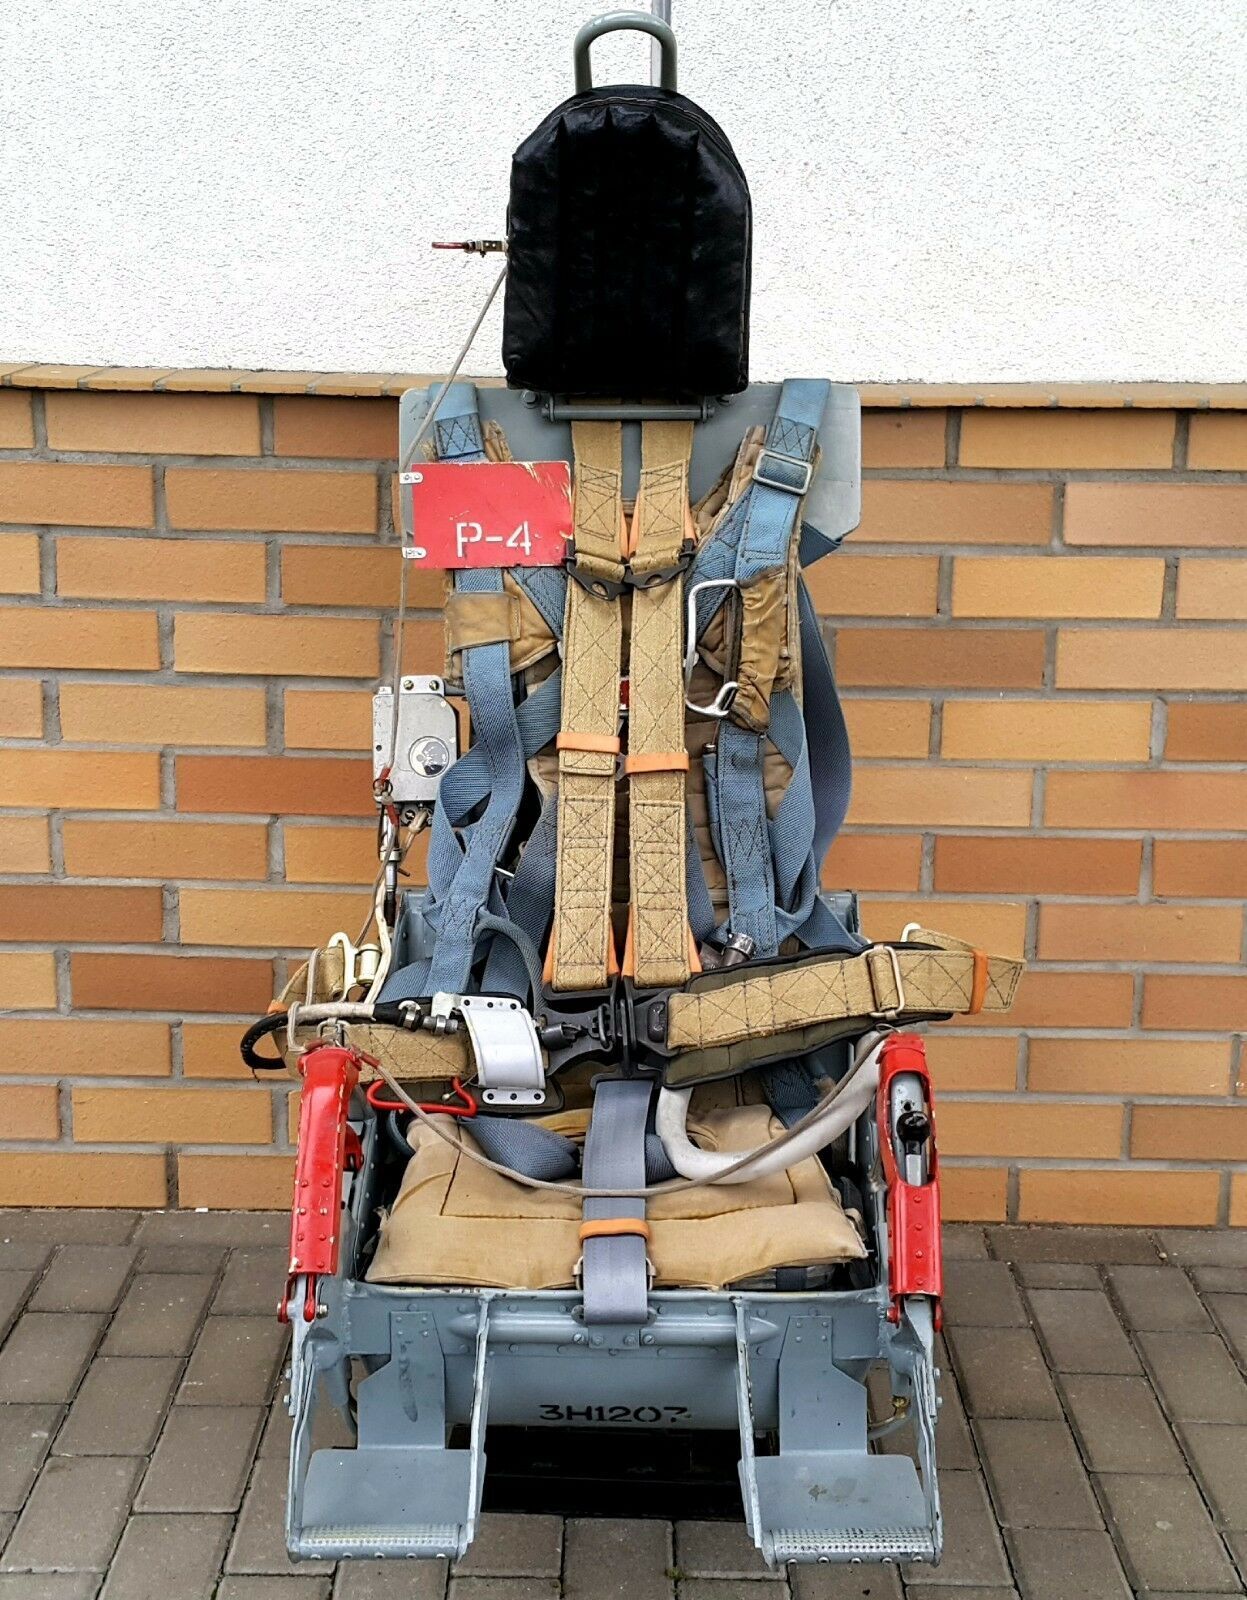 EJECTION SEAT COMPLEATE WITH PARACHUTE AIRCRAFT SOVIET ARMY POLISH JET TS ISKRA